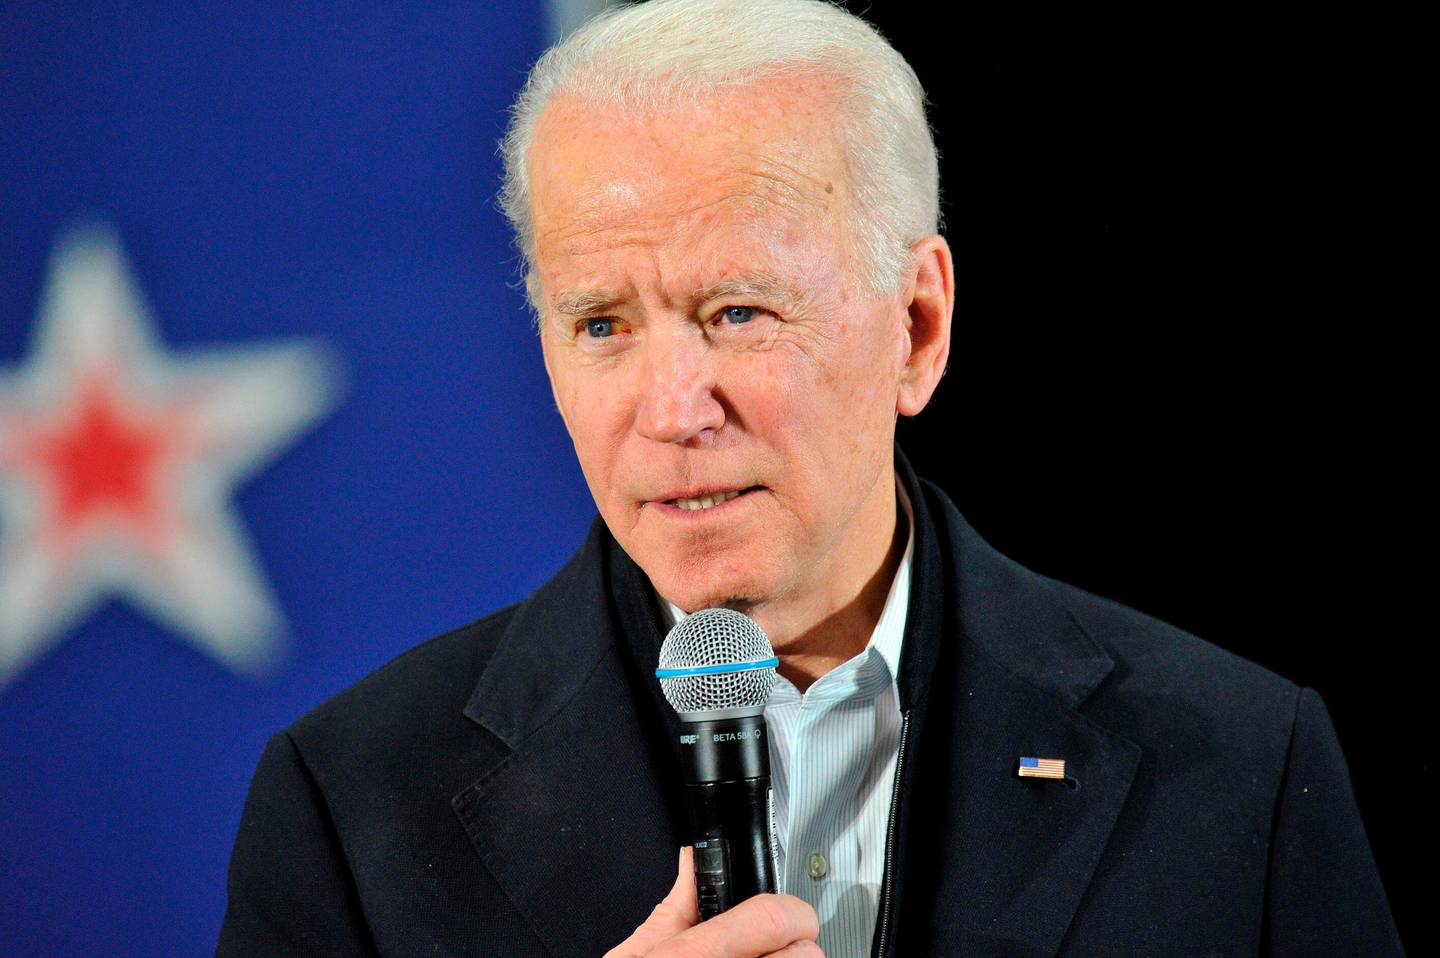 US Presidential candidate and former US Vice President Joe Biden addresses supporters and curious voters at the IBEW Local 490 in Concord, New Hampshire on February 4, 2020. - Democratic White House candidate Pete Buttigieg seized a shock lead in the chaotic Iowa caucuses, closely trailed by leftist senator Bernie Sanders, according to partial returns released on Tuesday after an embarrassing delay in reporting the results. Progressive standard-bearer Elizabeth Warren was in third place followed by Joe Biden, a disappointing showing for the former vice president who has claimed he is best positioned to defeat Donald Trump in November. (Photo by Joseph Prezioso / AFP)